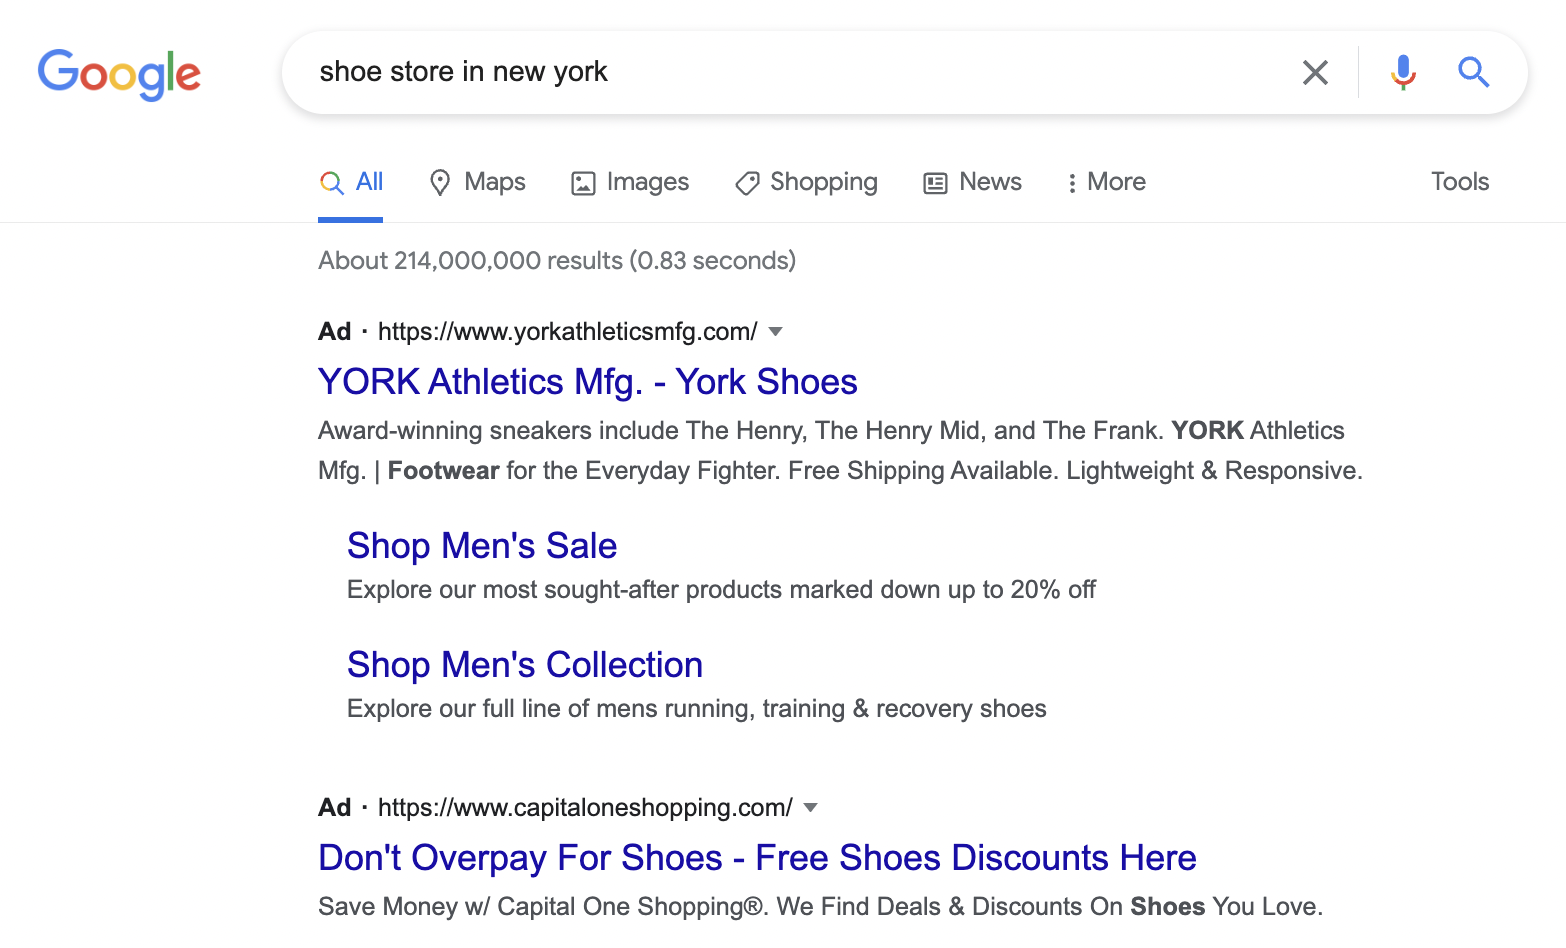 shoe store ads from google ads